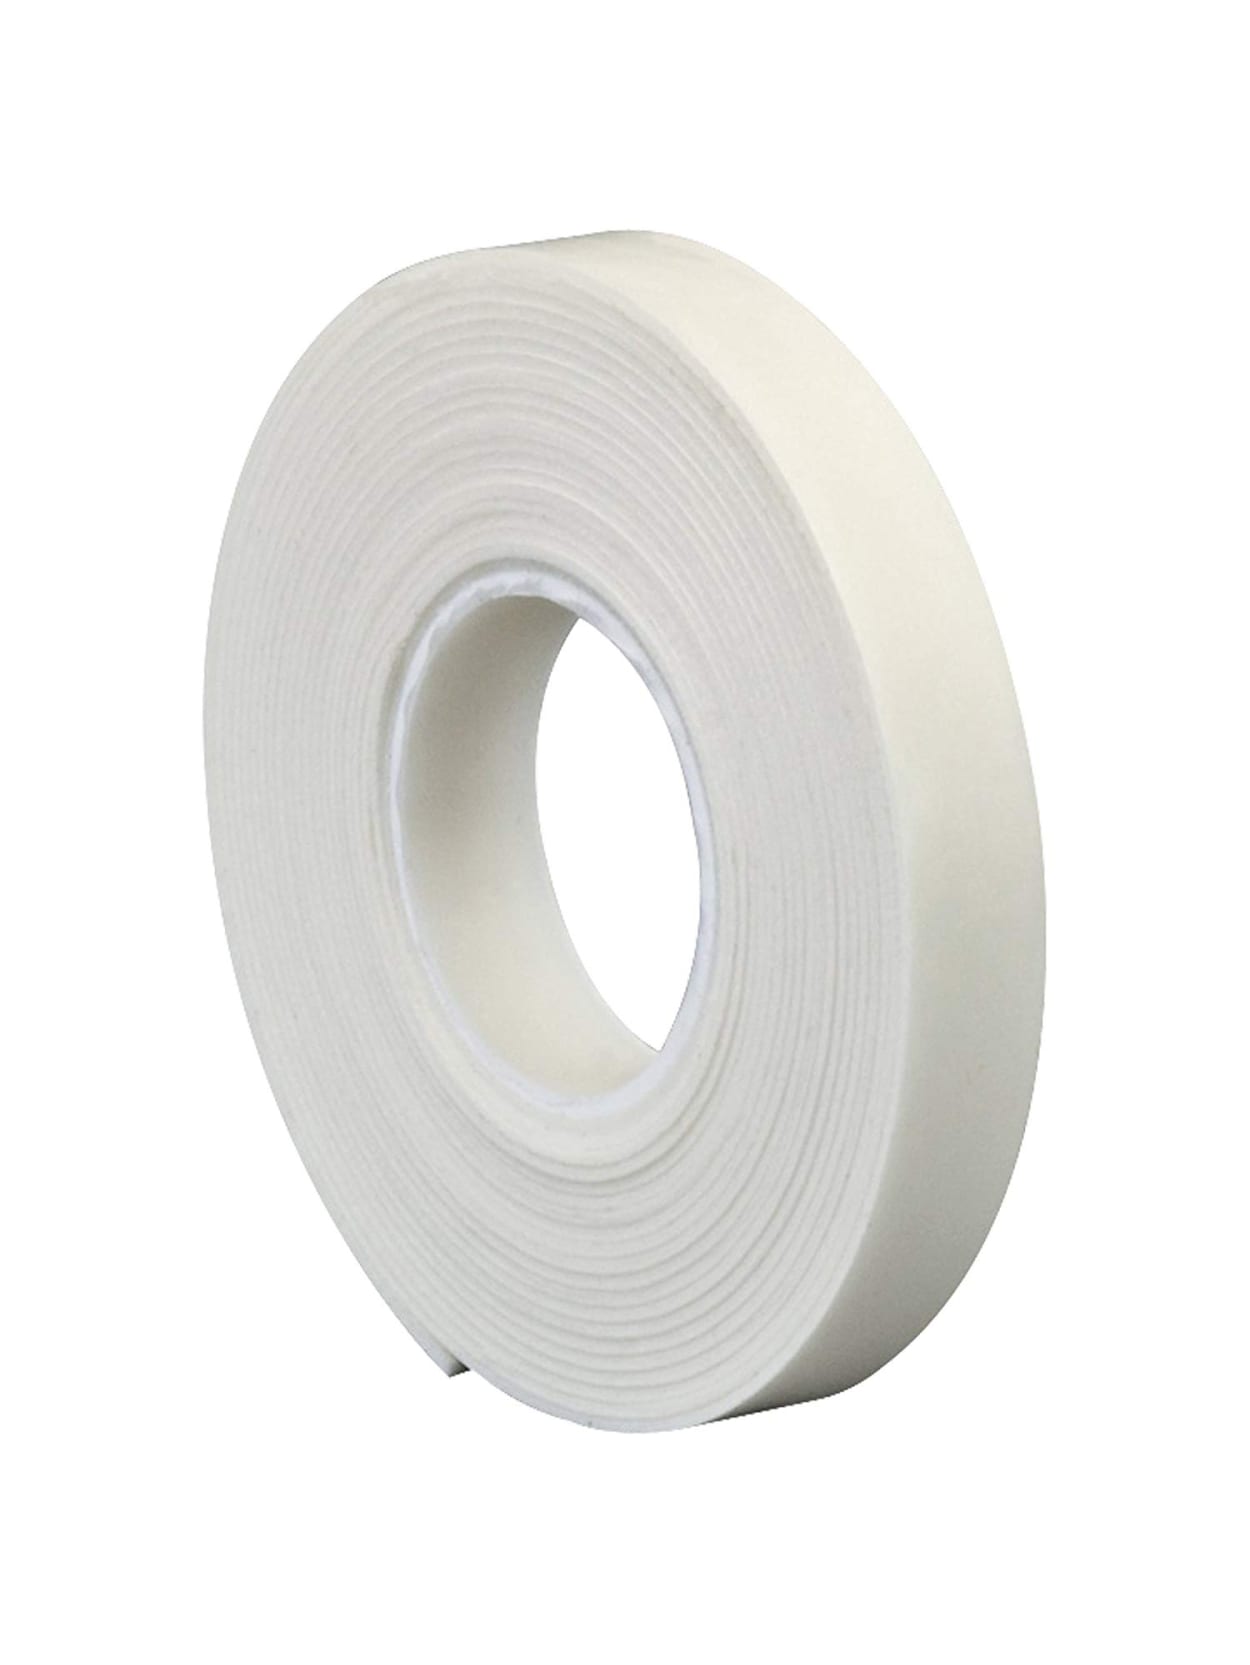 3m commercial double sided tape